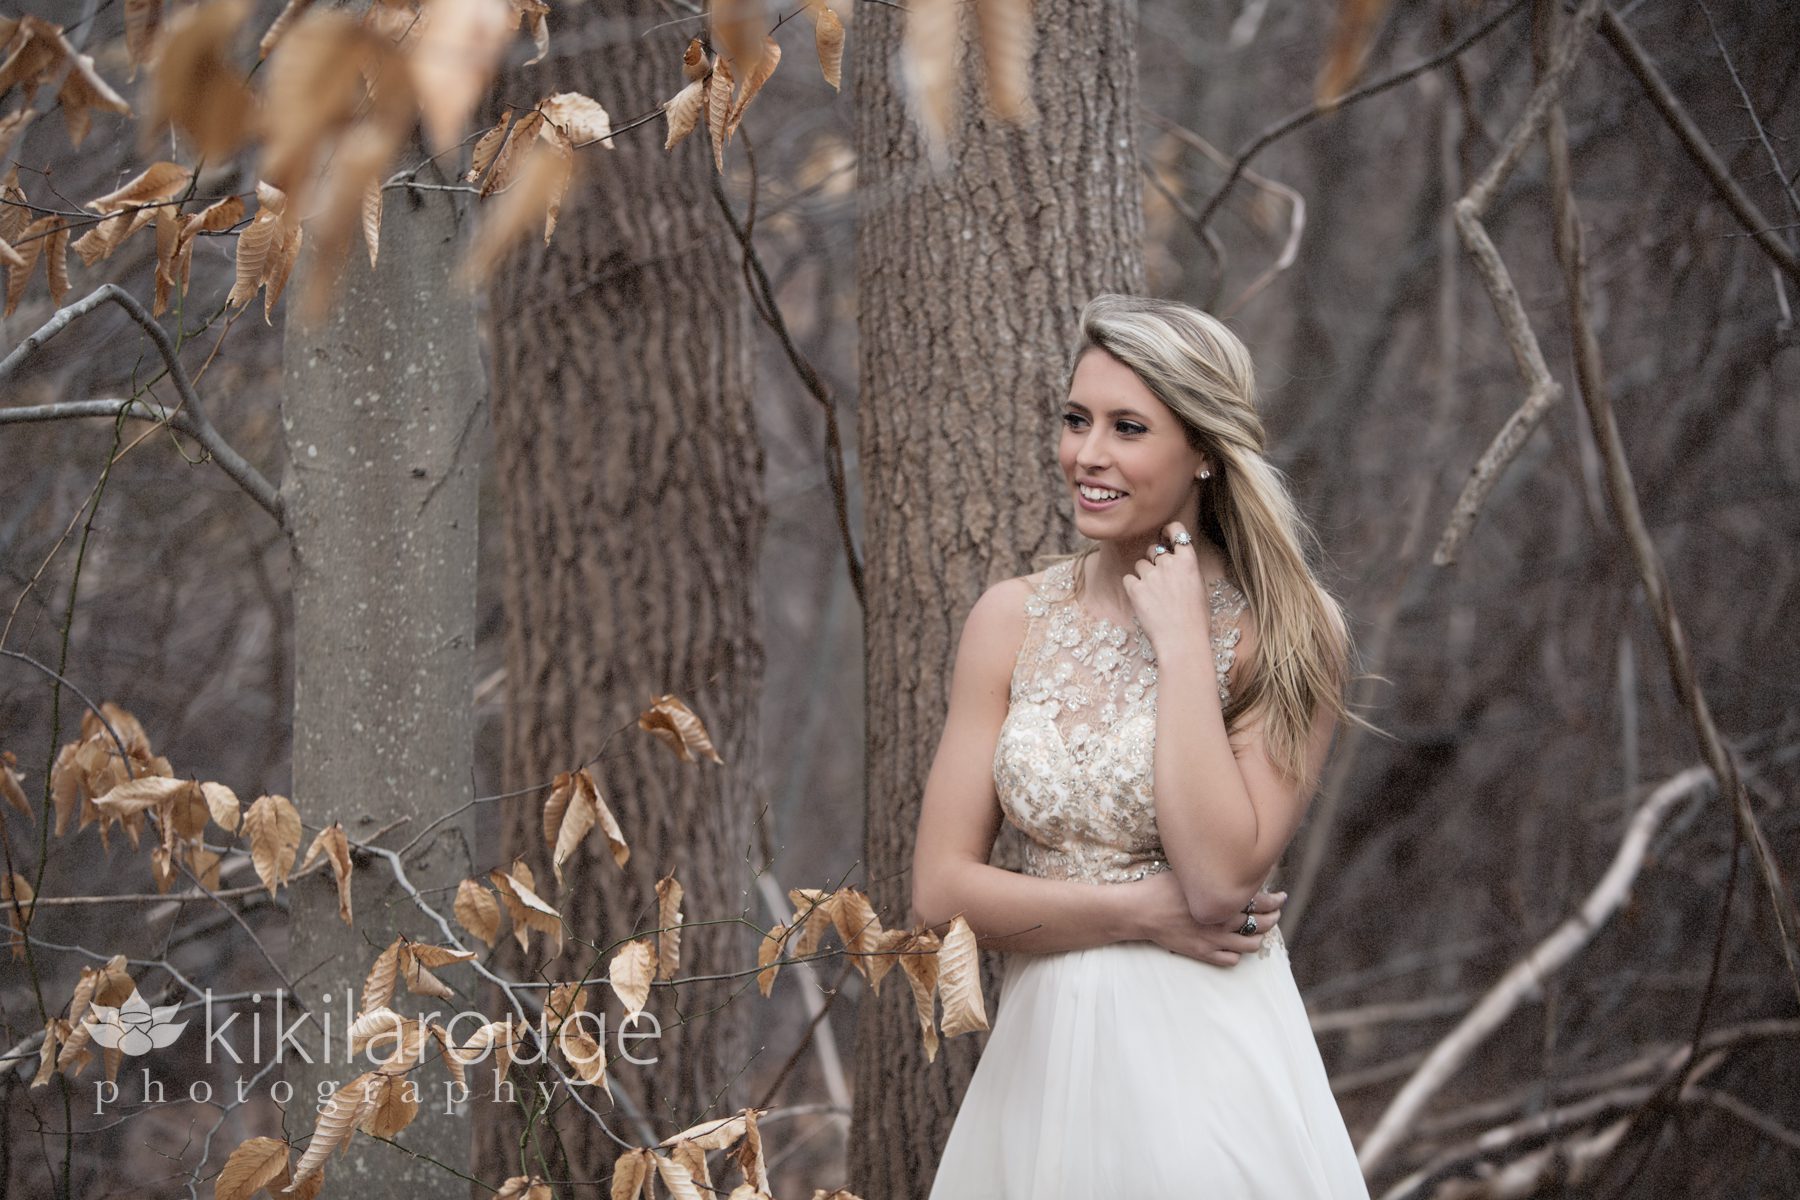 Senior Portrait in woods with prom dress